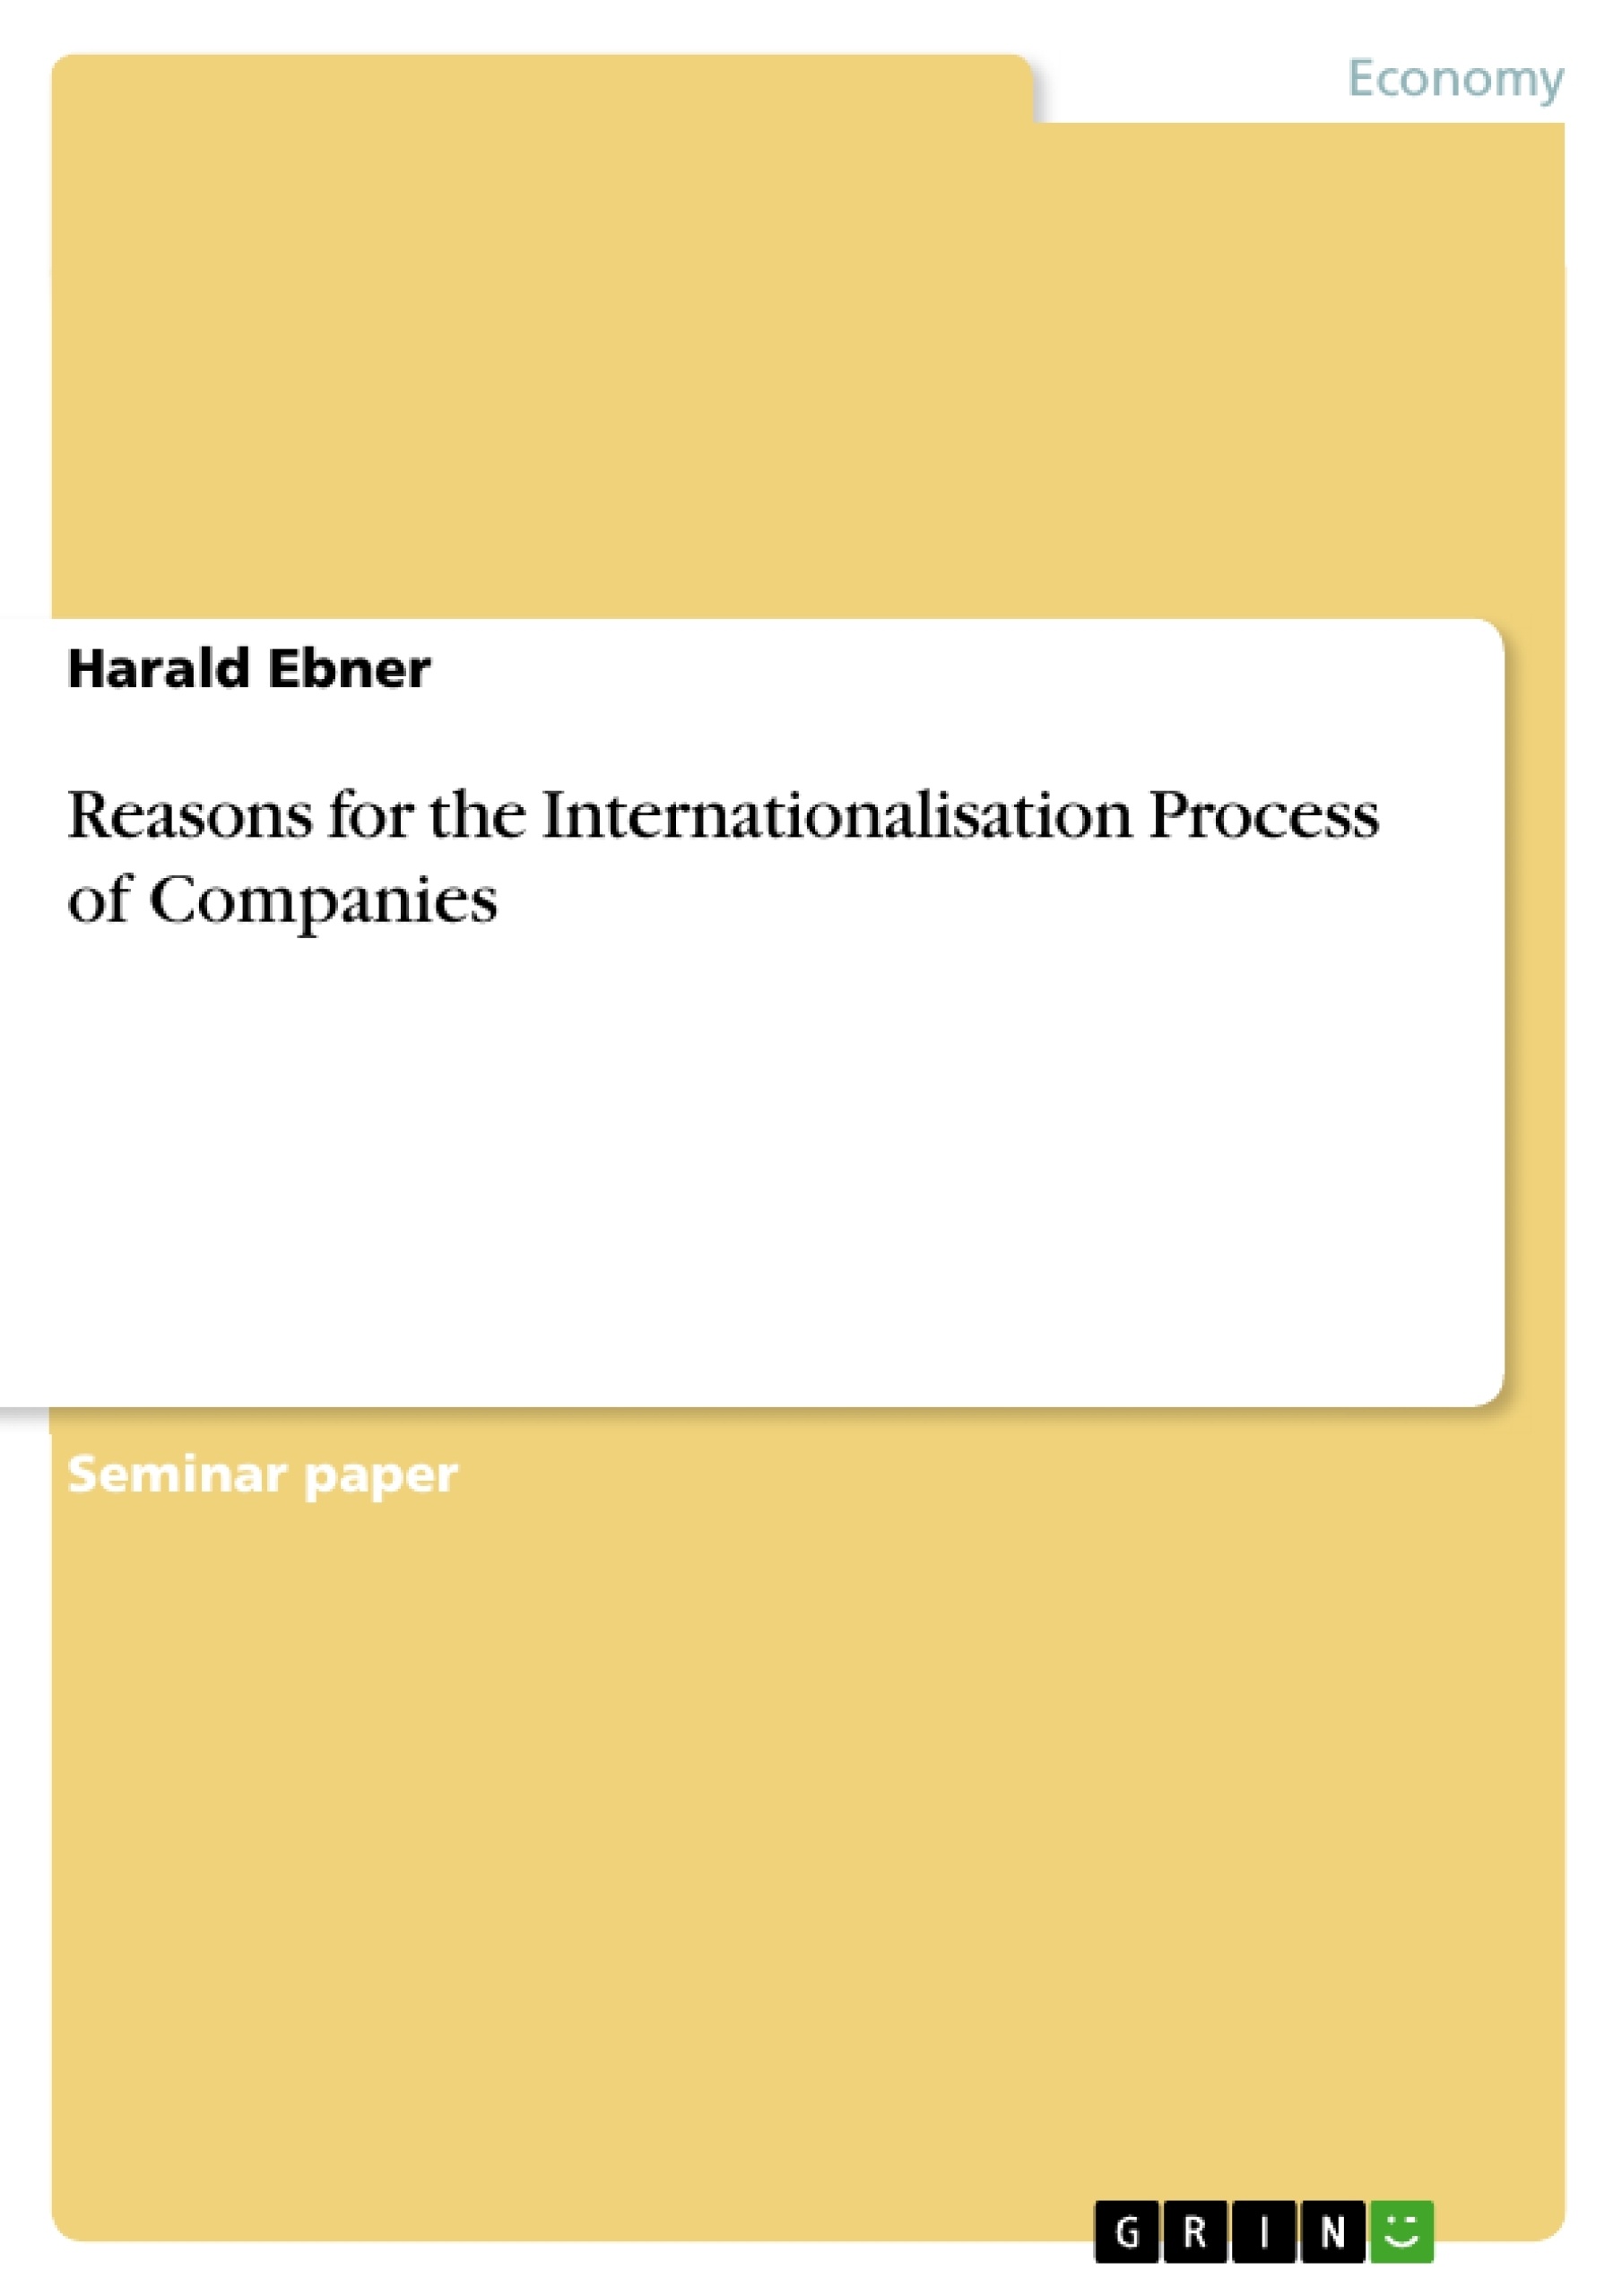 Title: Reasons for the Internationalisation Process of Companies